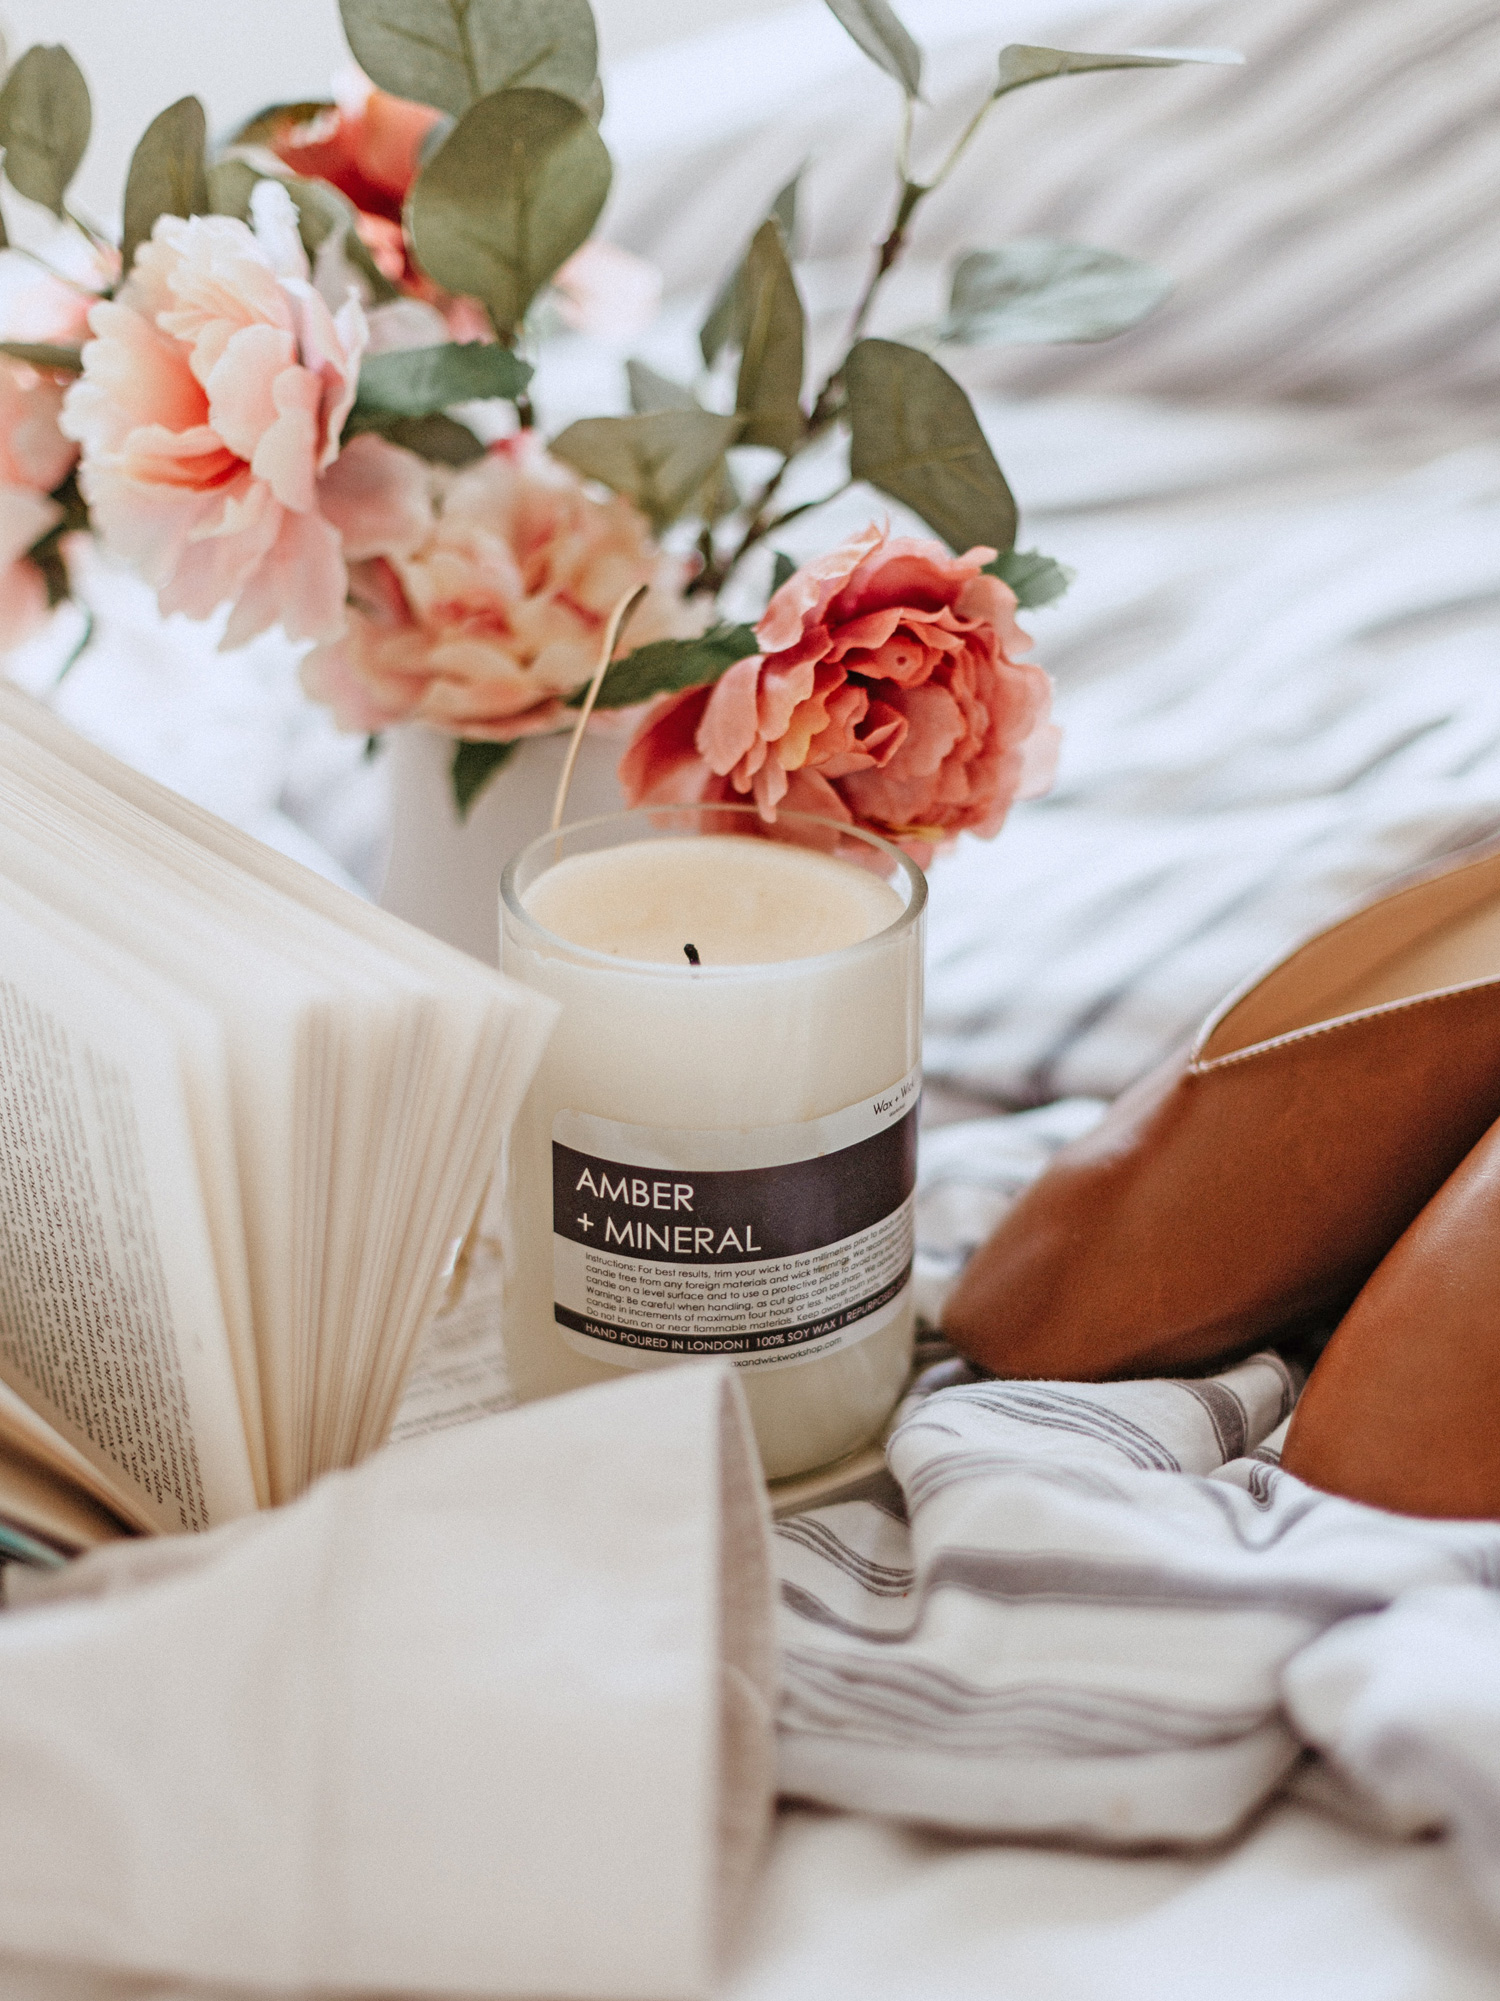 book, flowers and candle